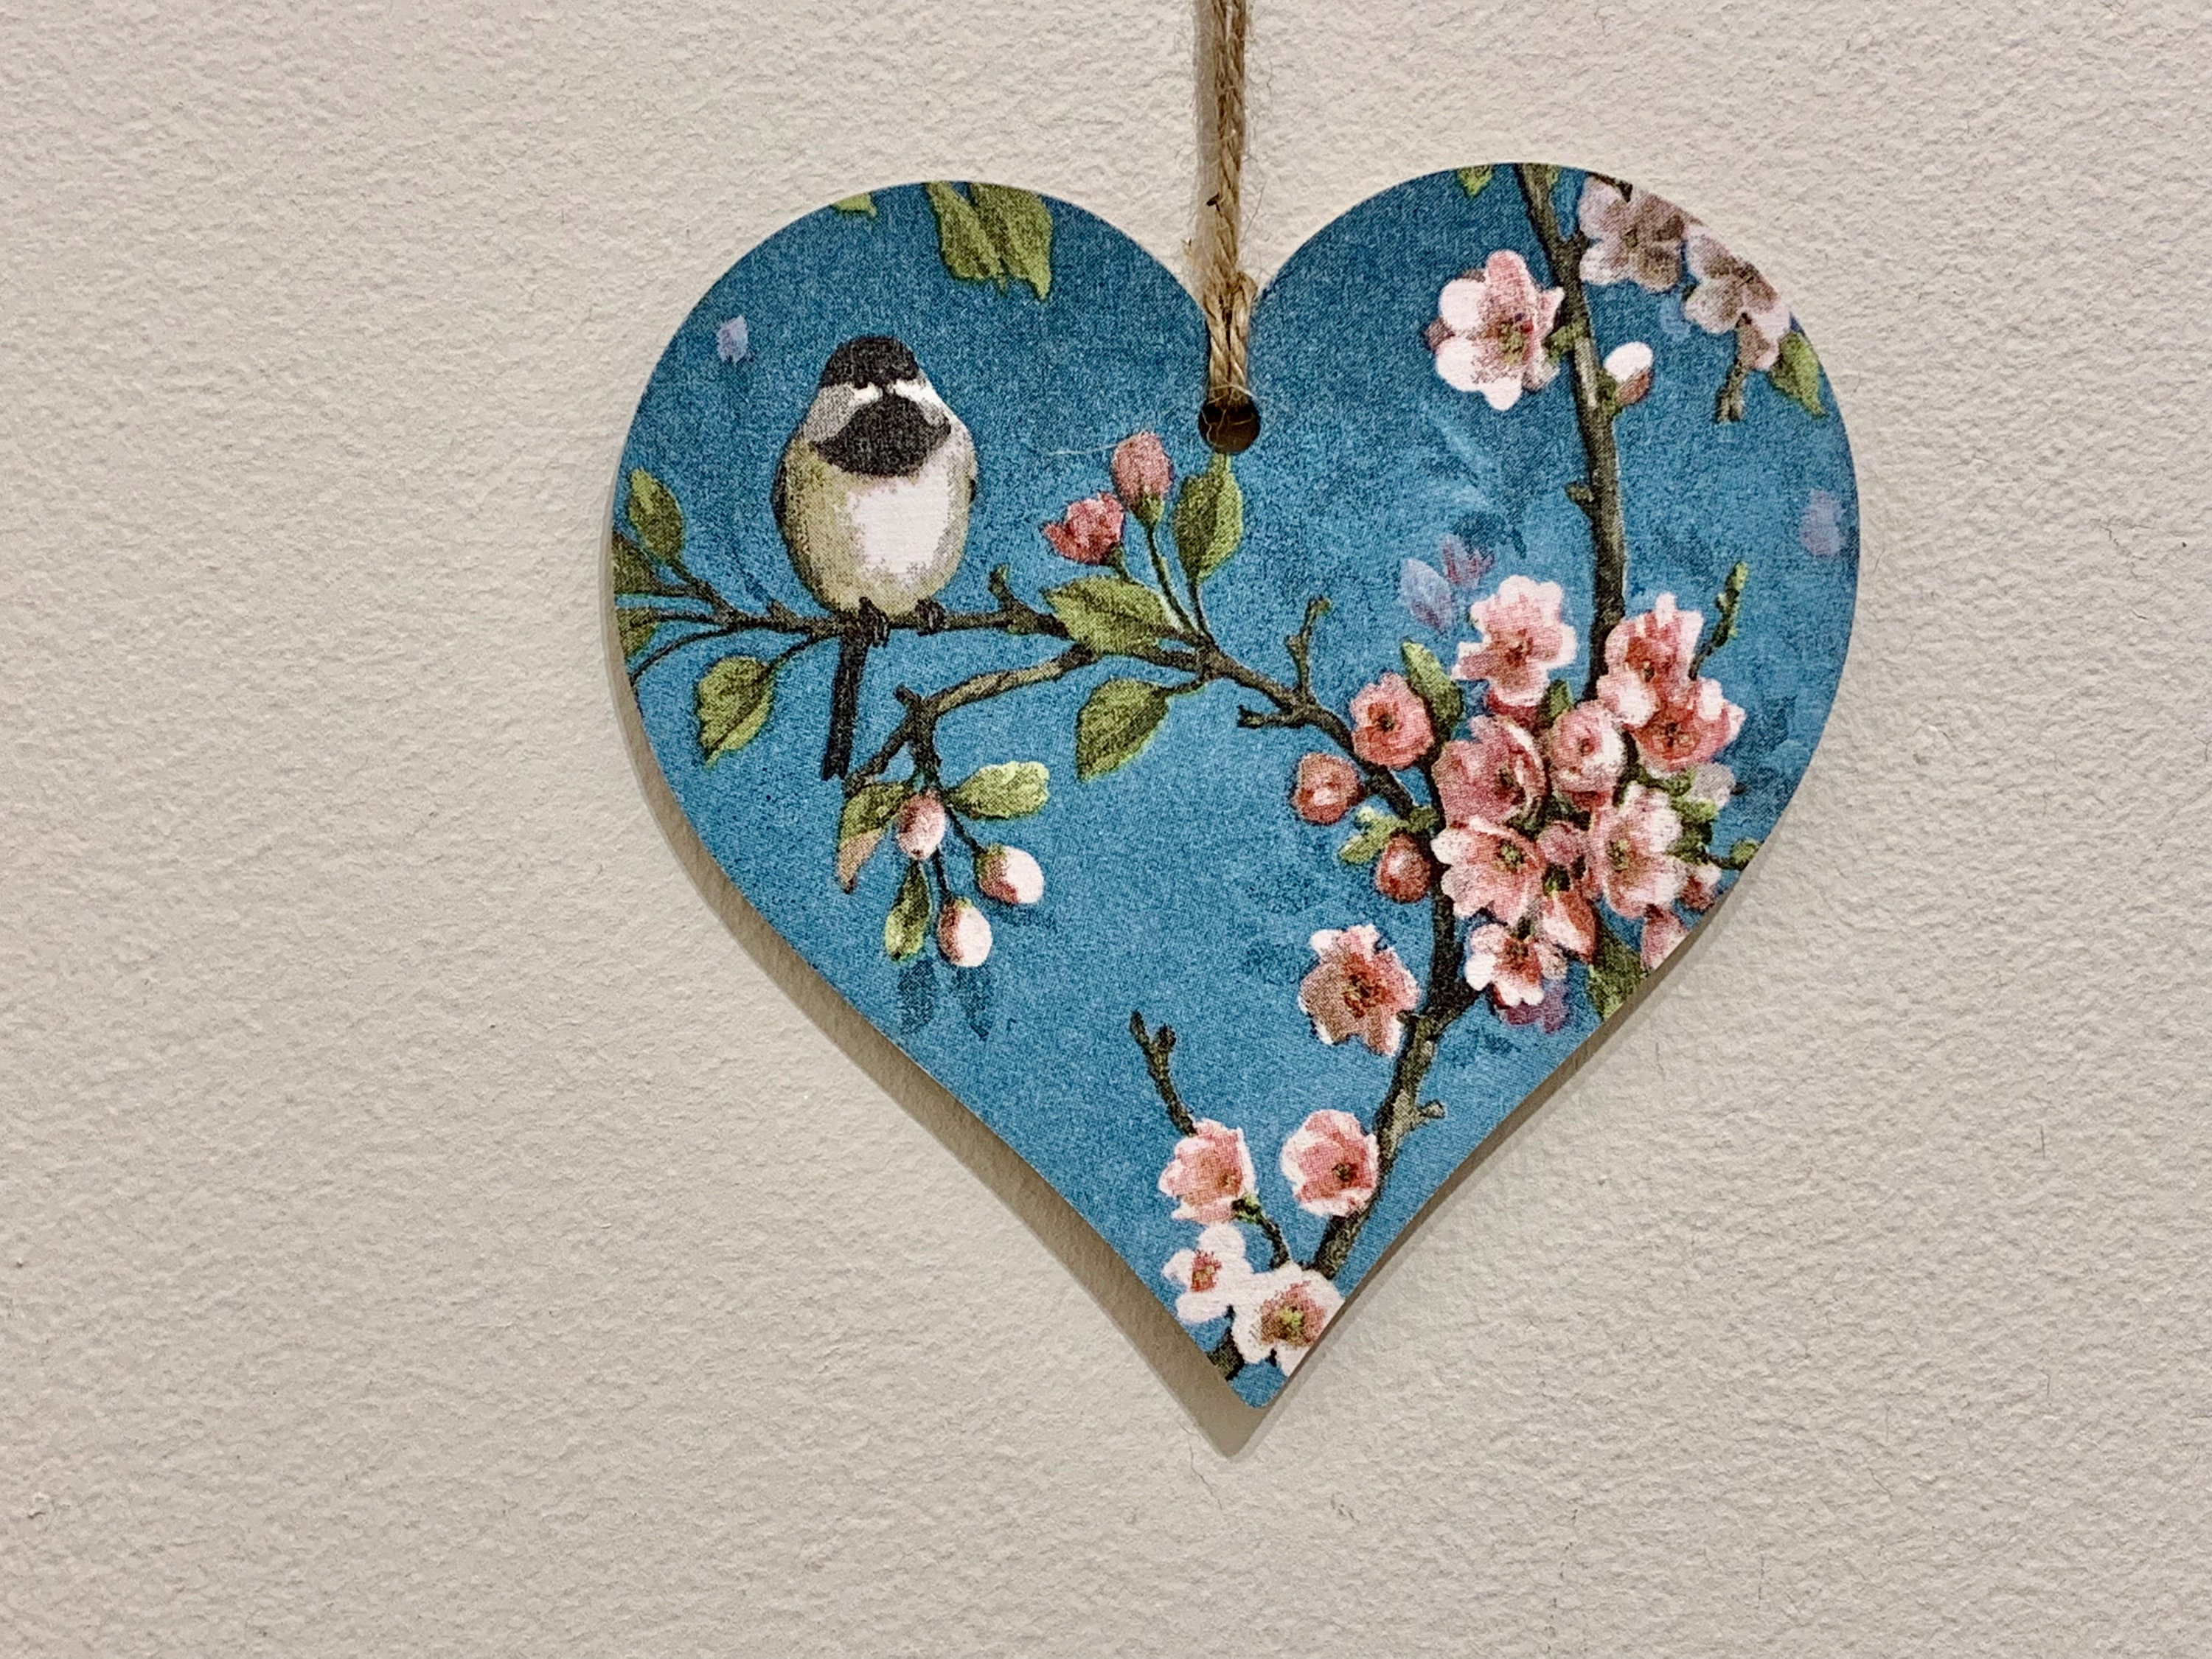 How to Update Some Wooden Hearts With Decoupage